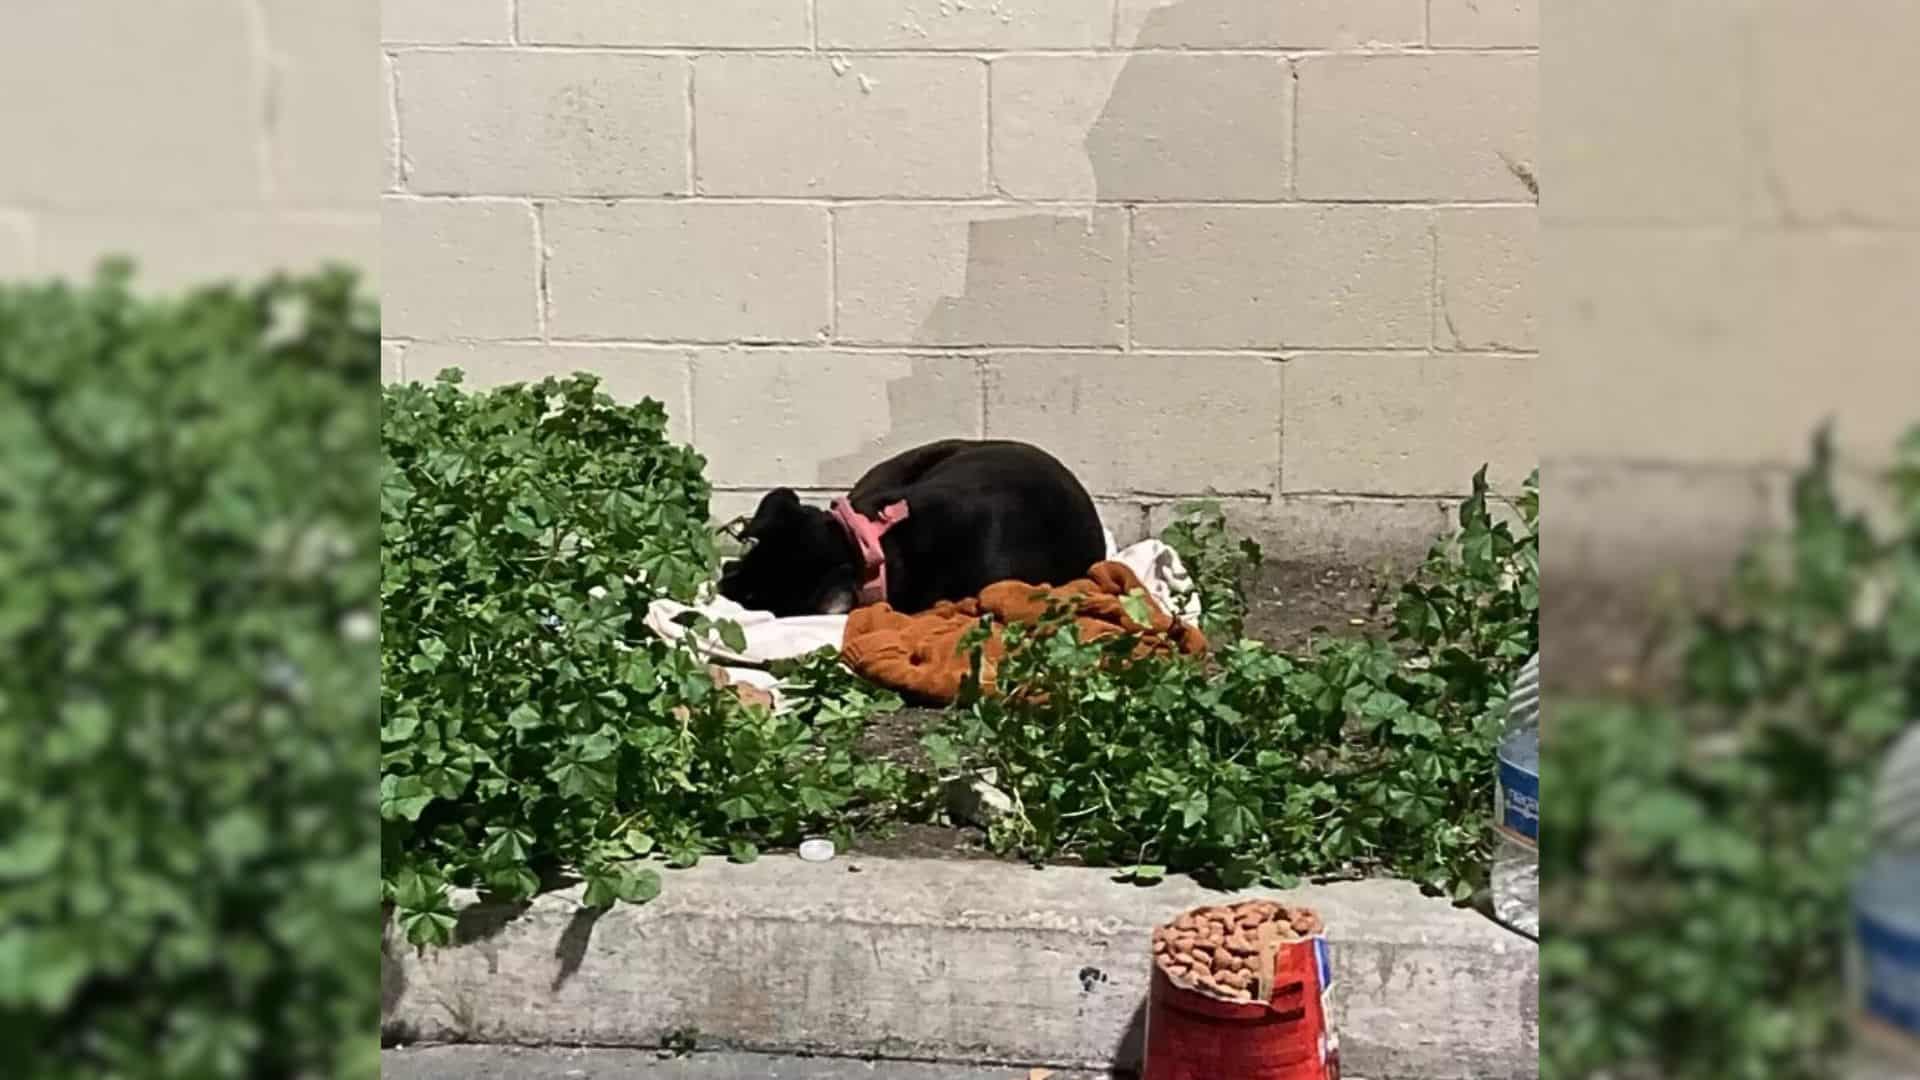 Dog Was Living Alone In A Parking Lot With A Blanket And Some Food Until Rescuers Came To Help